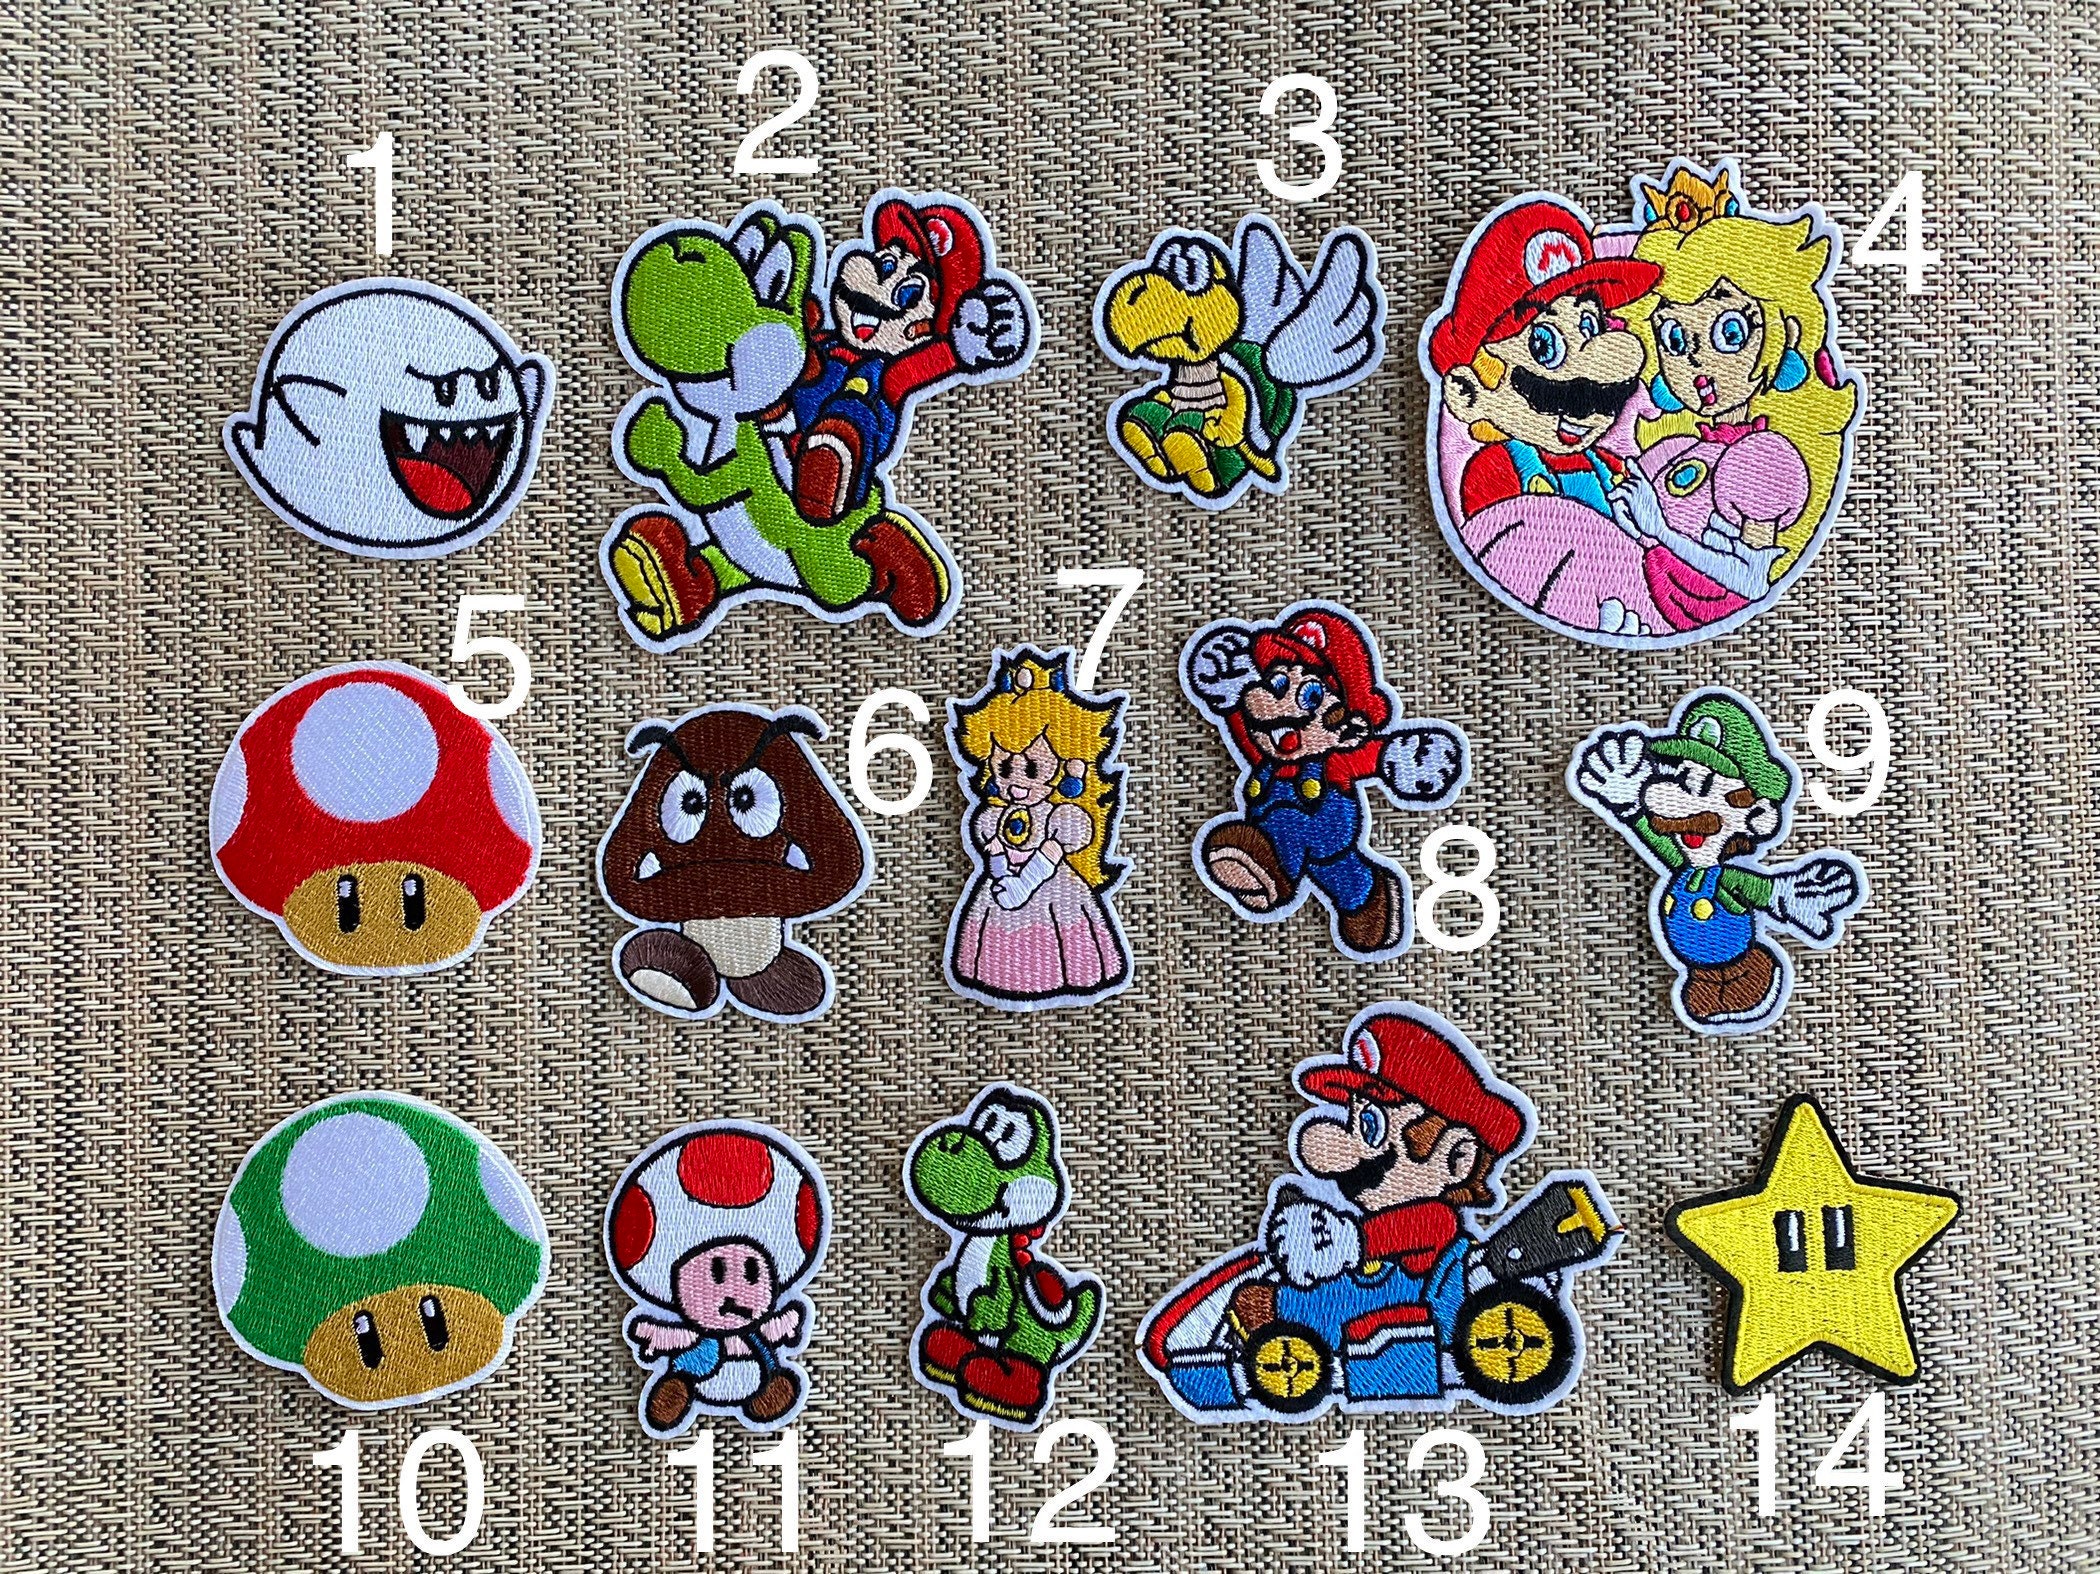 16pcs Iron on Patches Cartoon Mario Patches Embroidered Applique Kit,Patch Iron-On or Sew-On Applique for Kids DIY Crafts,Patches for Kids Clothes